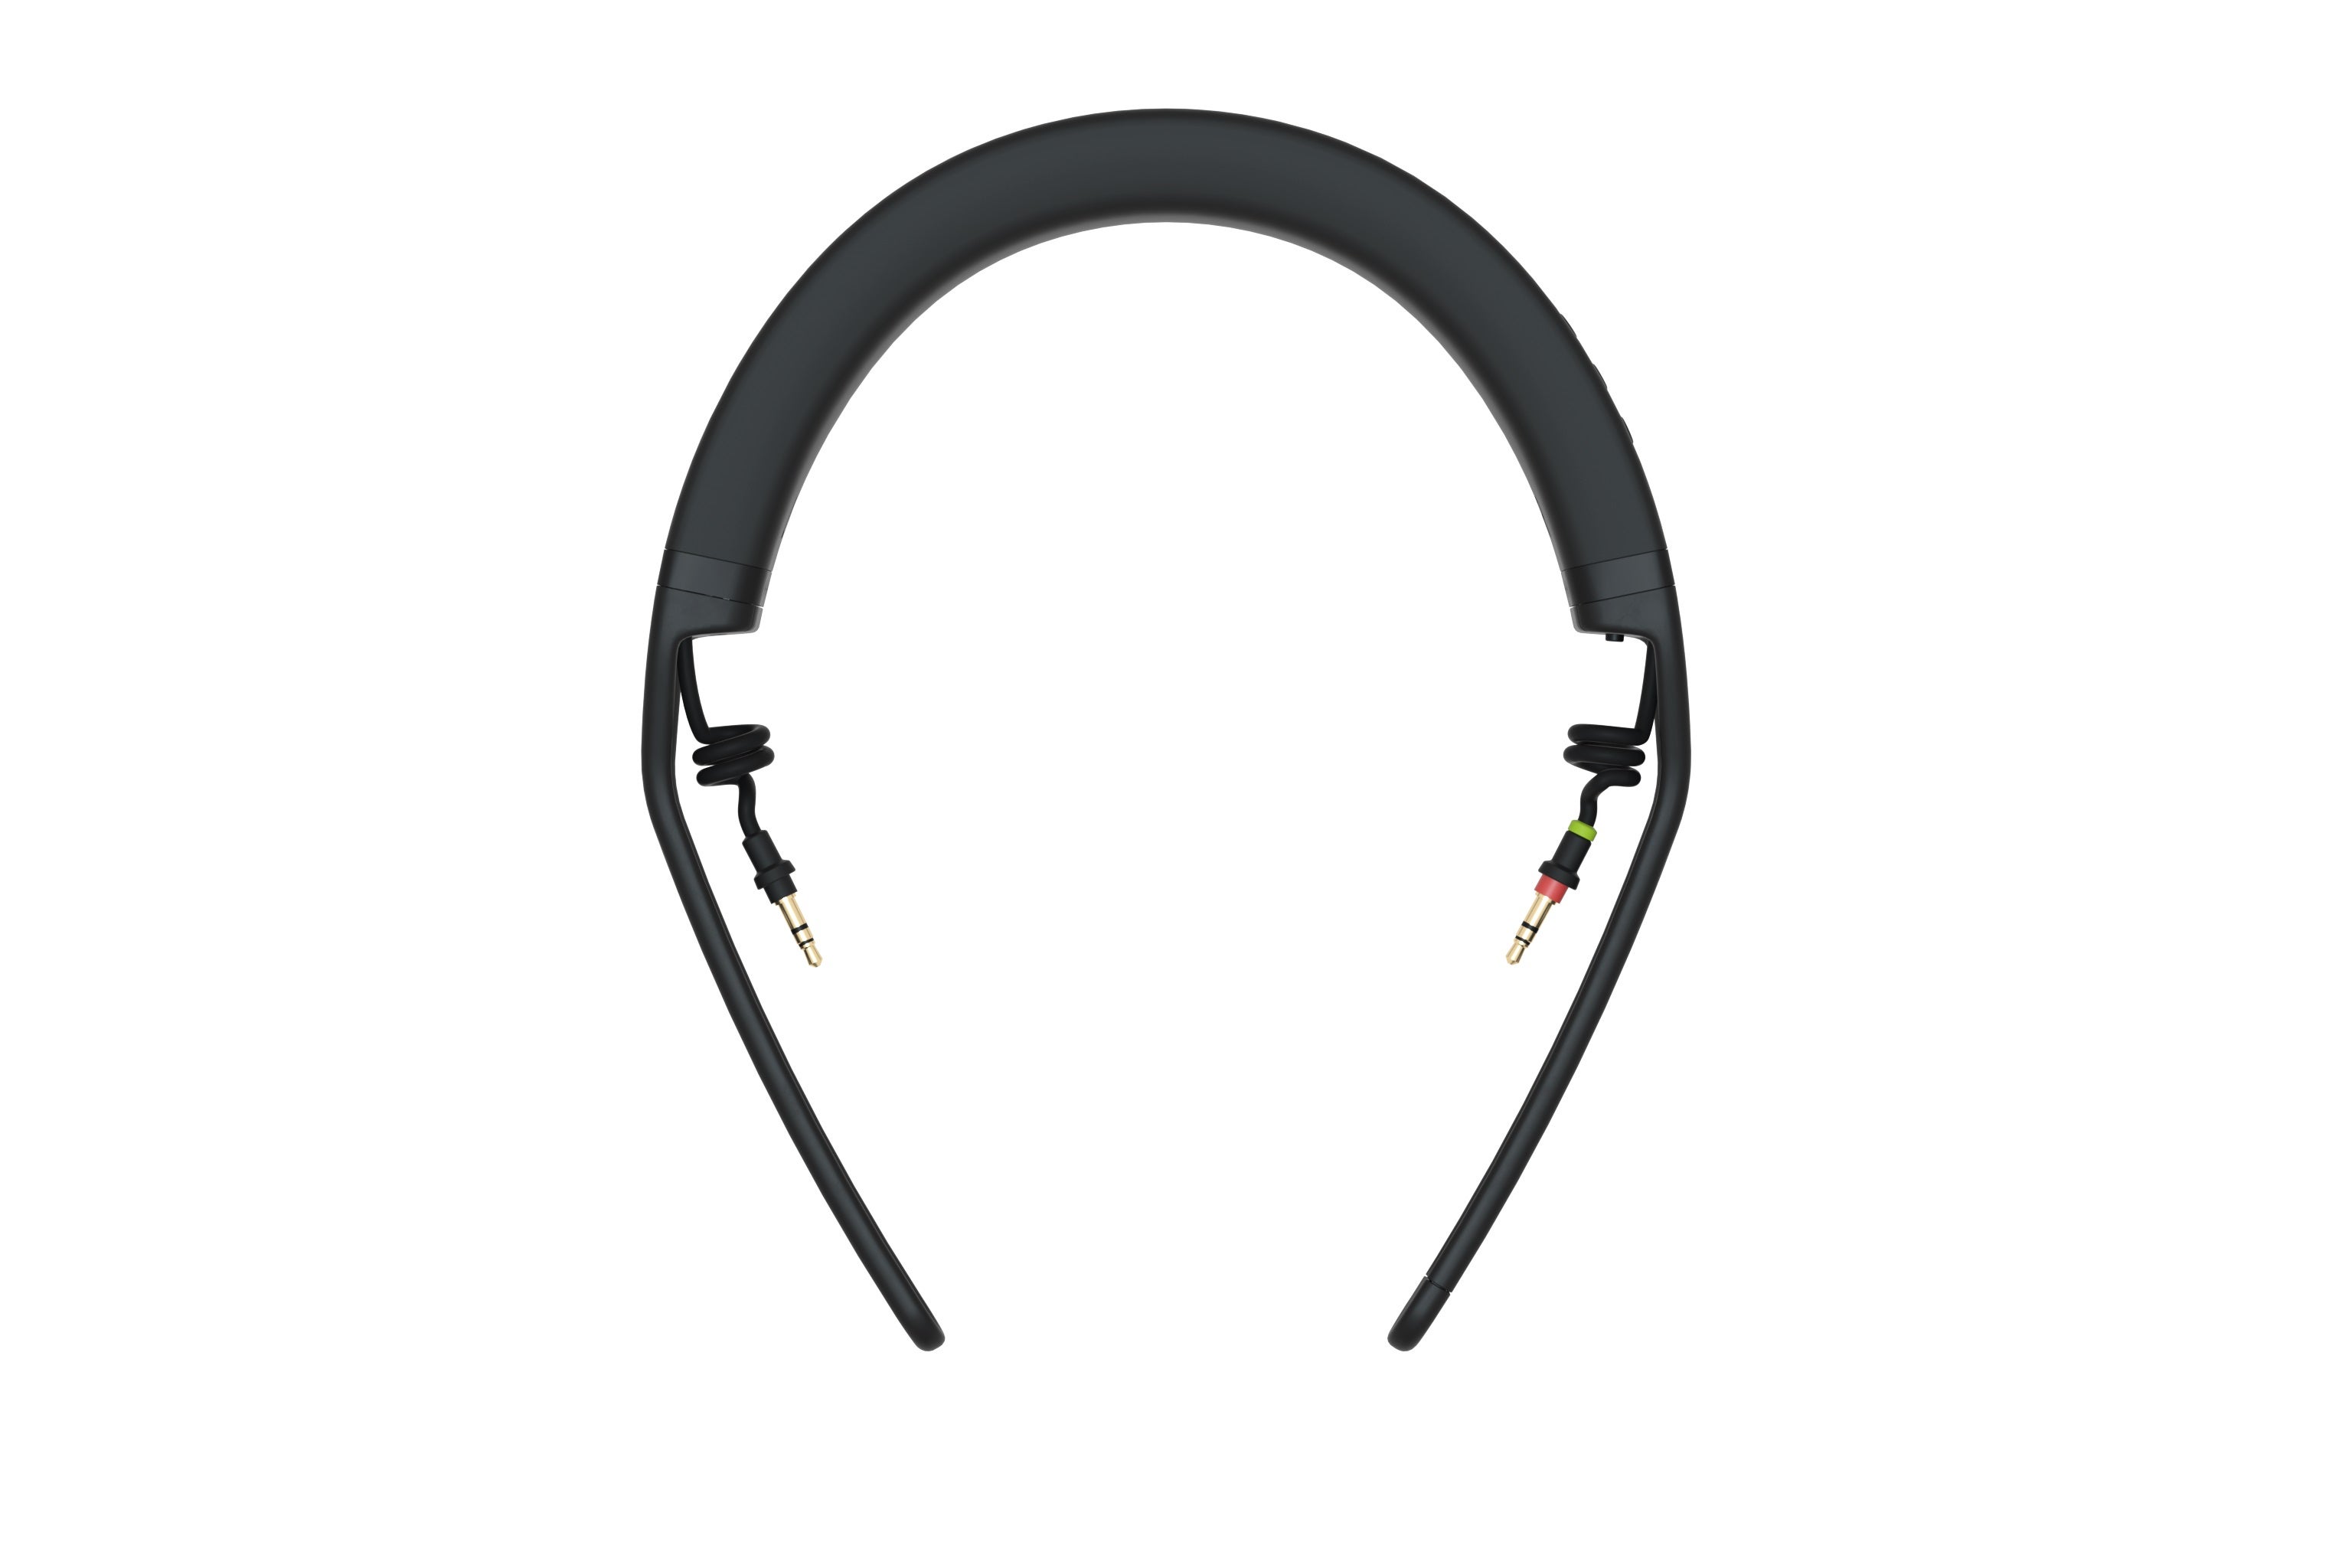 The unassembled TMA-2 Studio Wireless+ headphones can be used as a headband